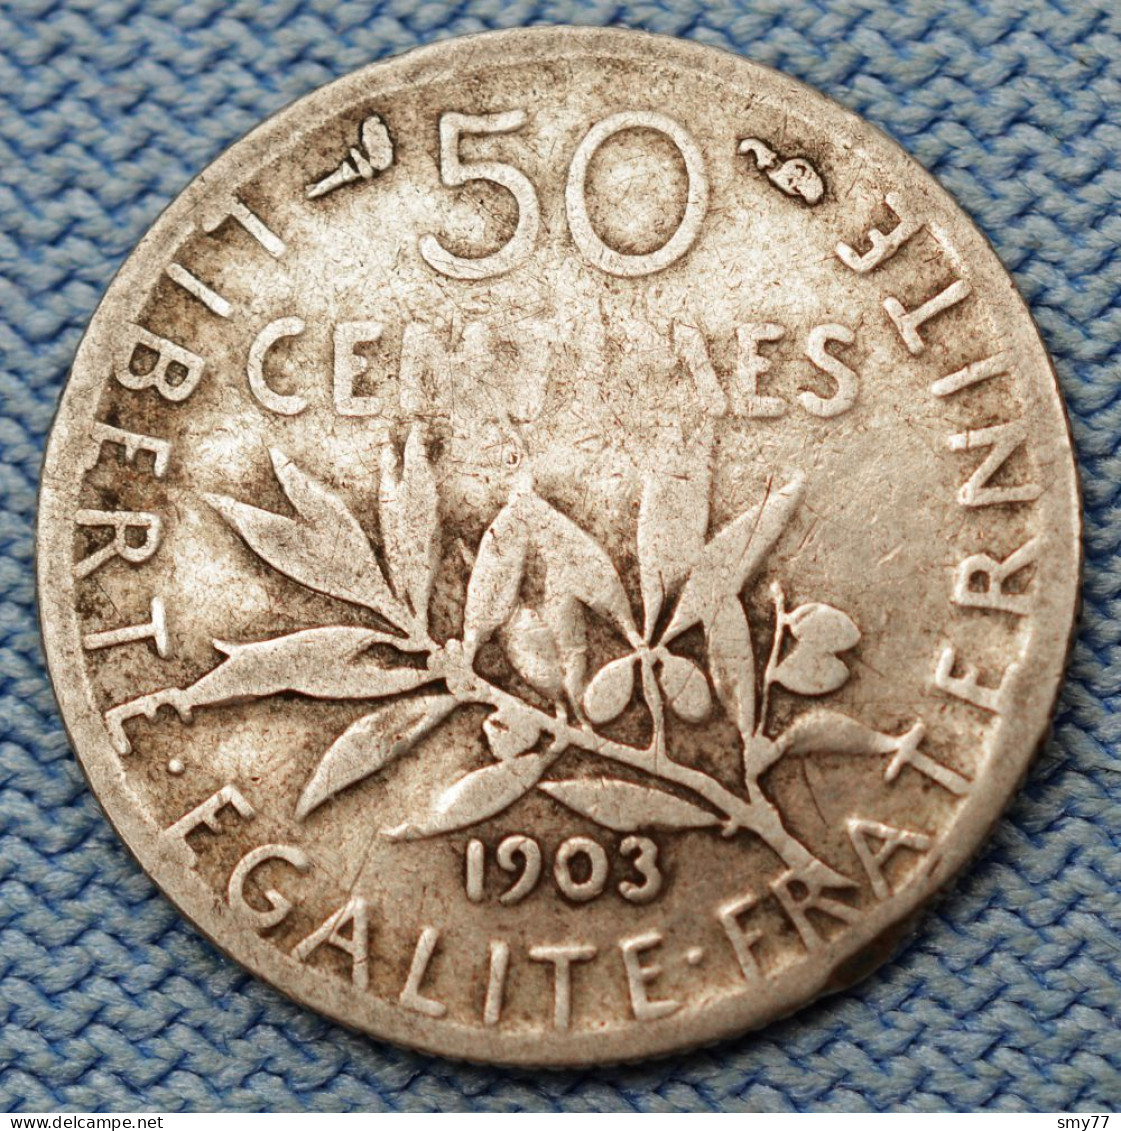 France • 50 Centimes 1903 • Semeuse • Cleaned • [24-501] - 50 Centimes